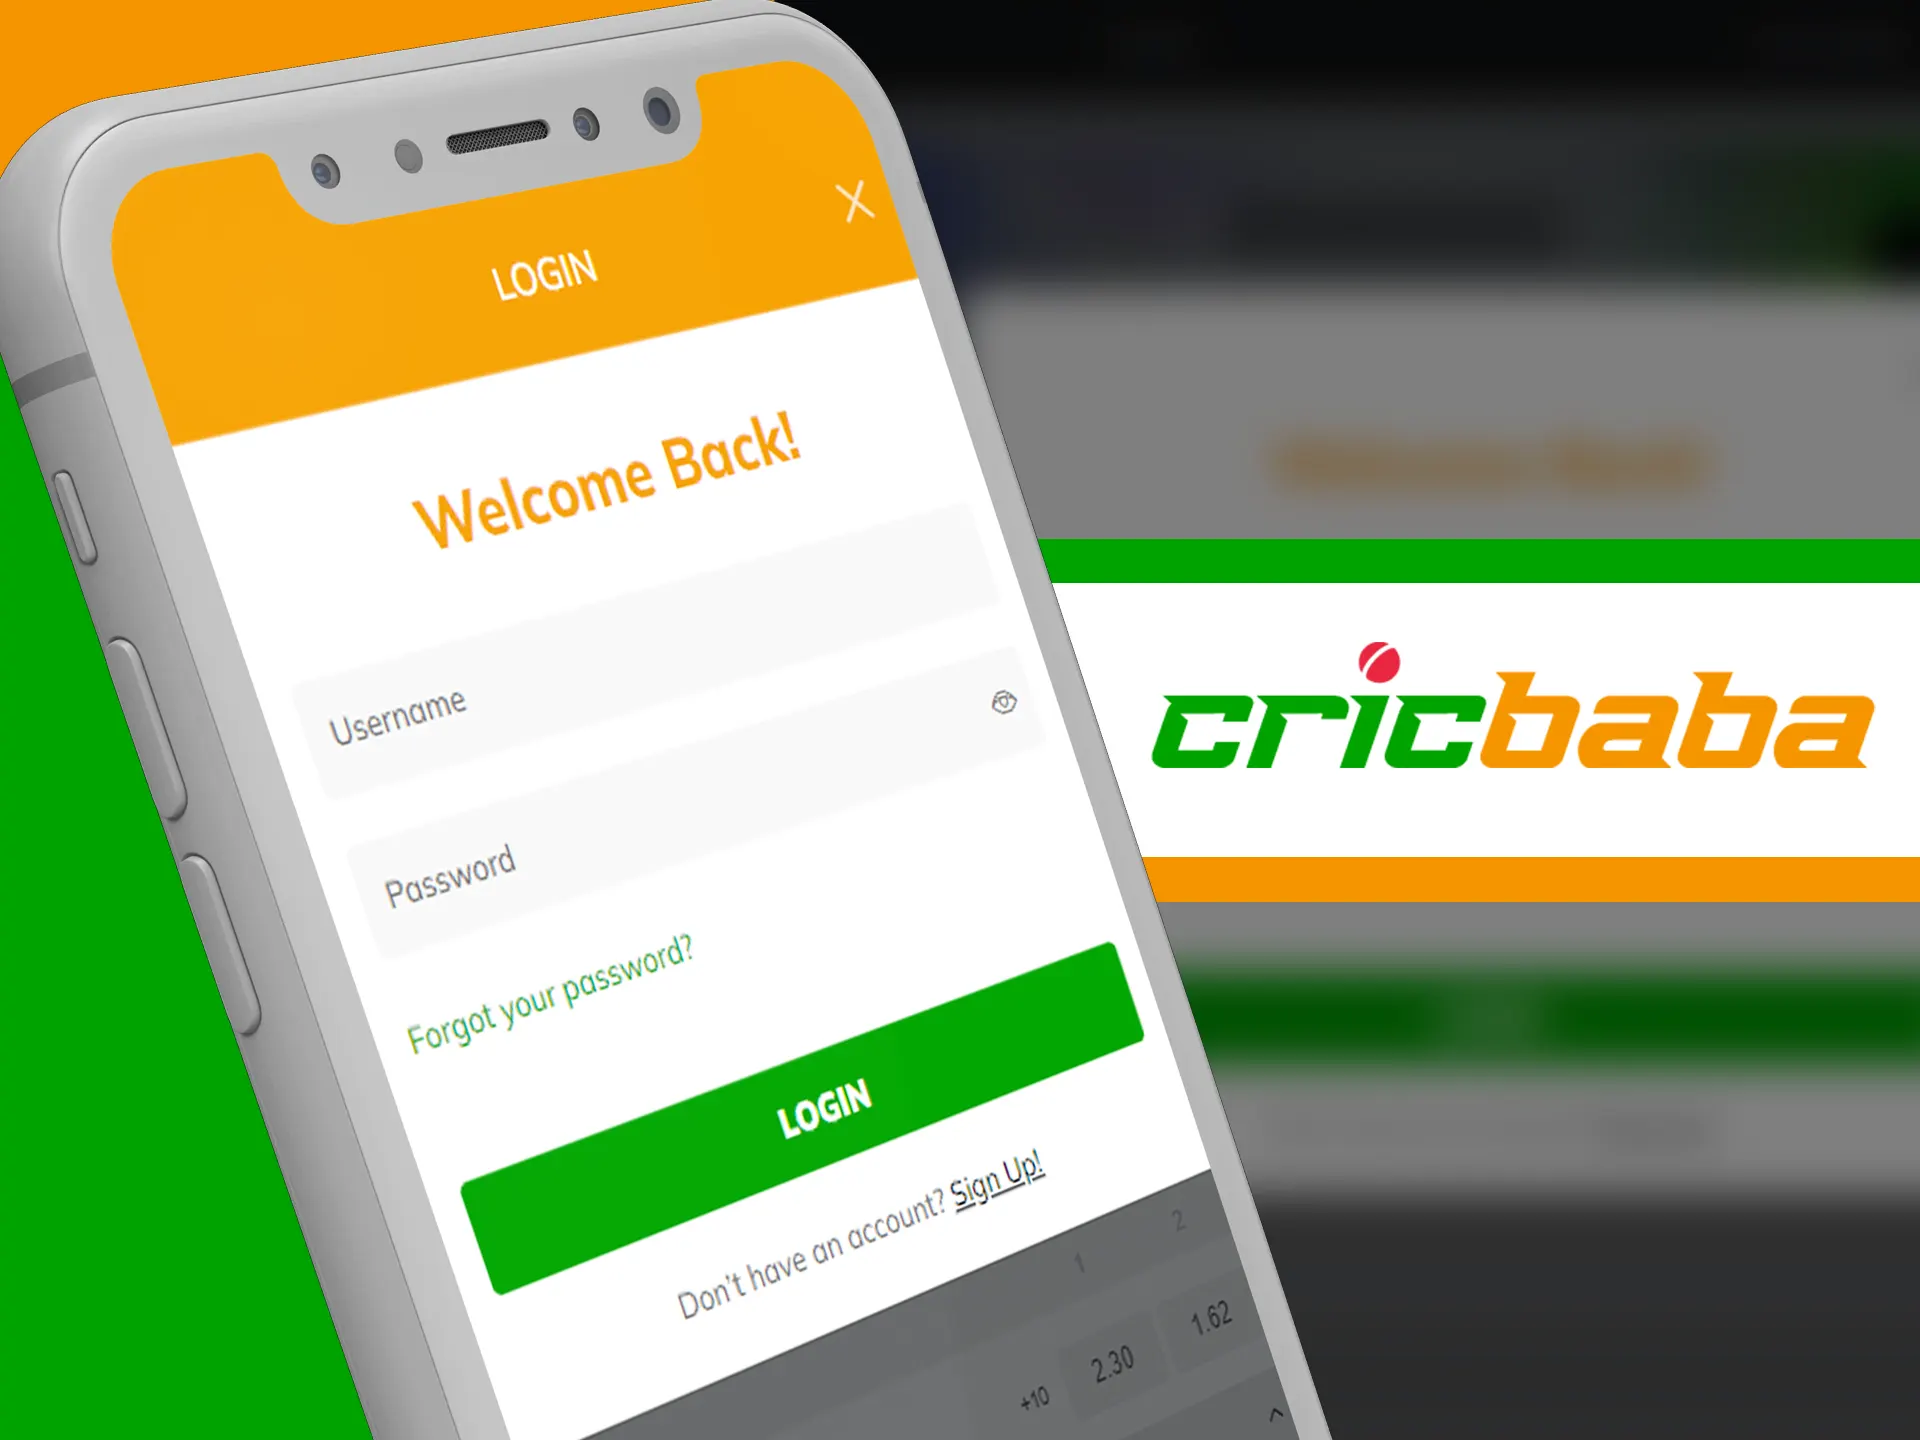 Log in and start betting at Cricbaba.